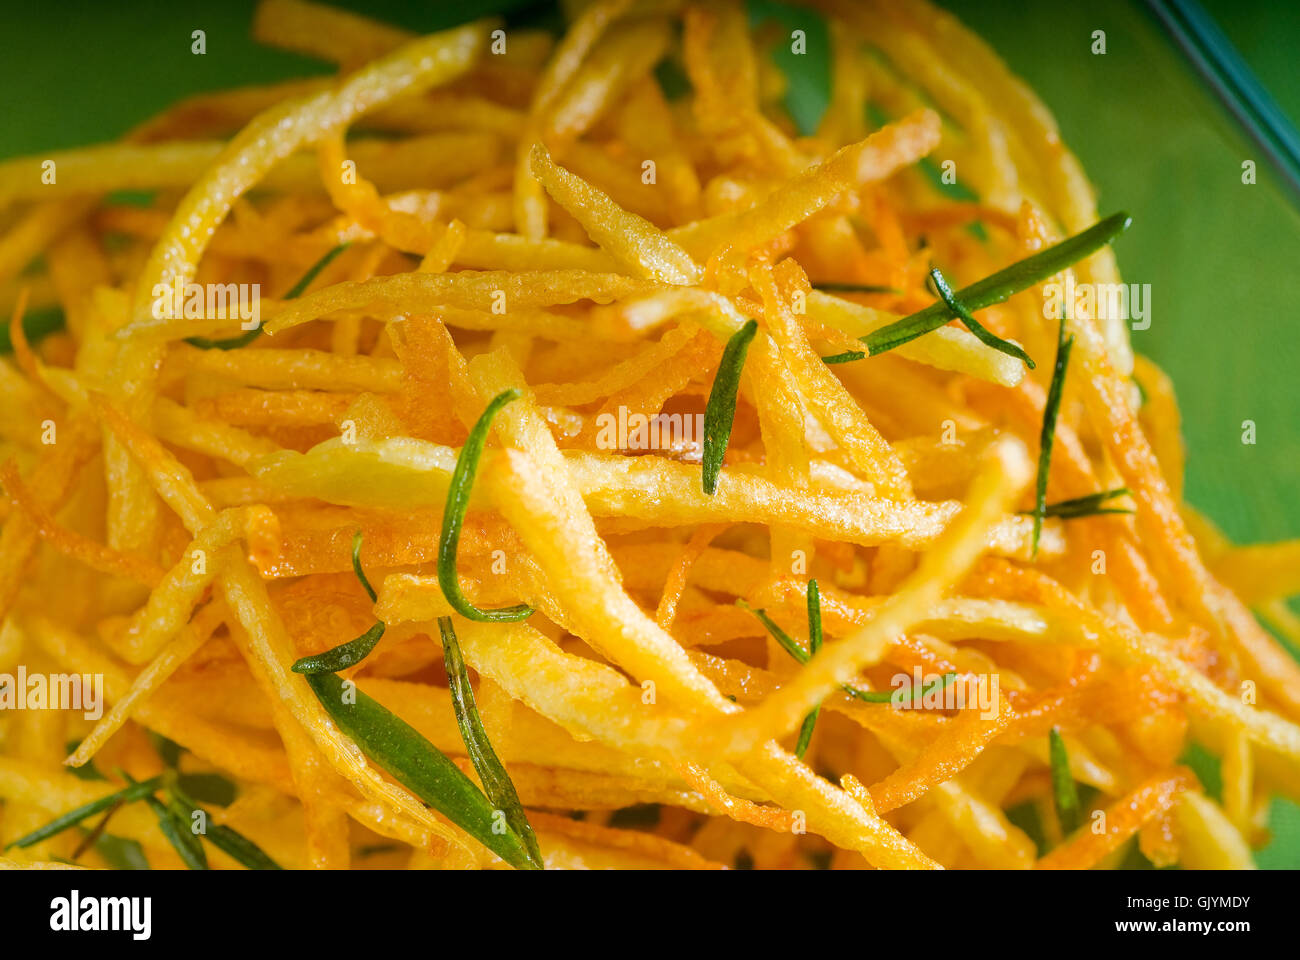 french appetizing appetizer Stock Photo